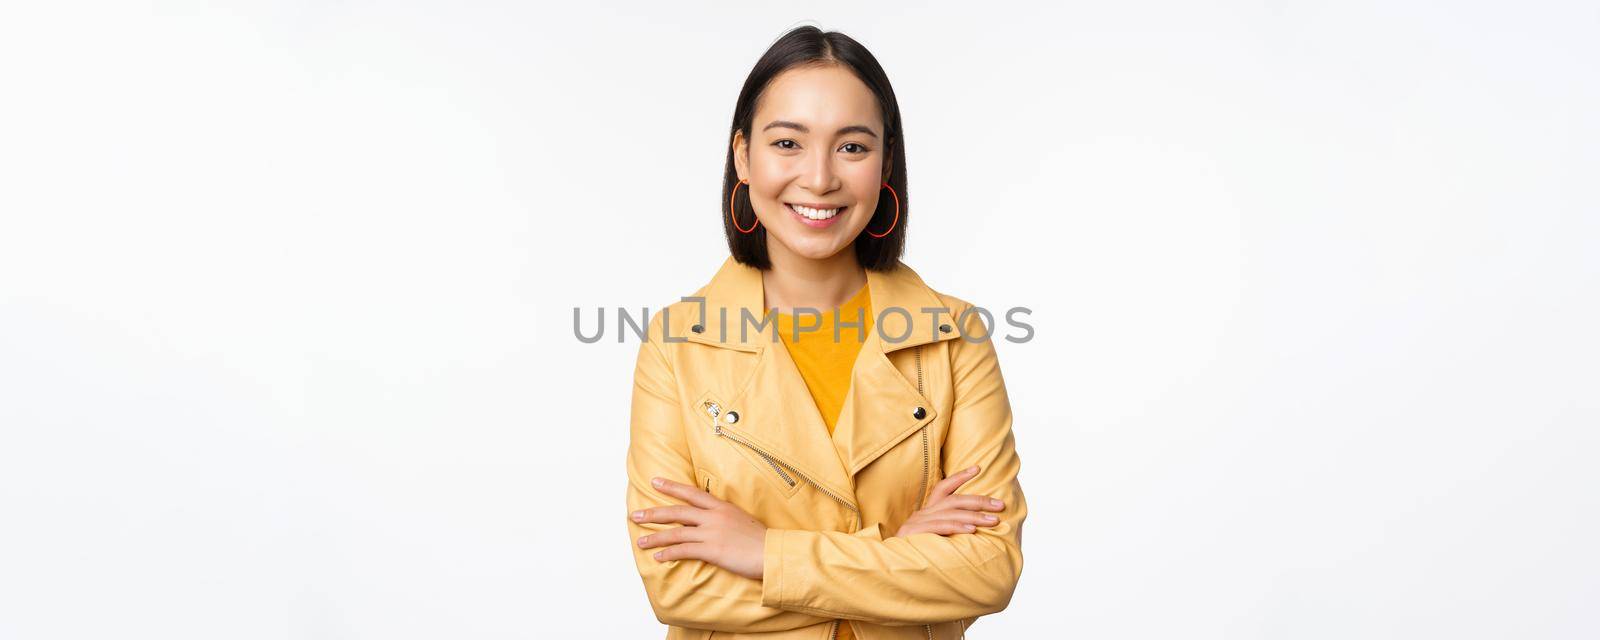 Portrait of asian woman in yellow jacket, smiling and looking happy, standing over white background. Copy space